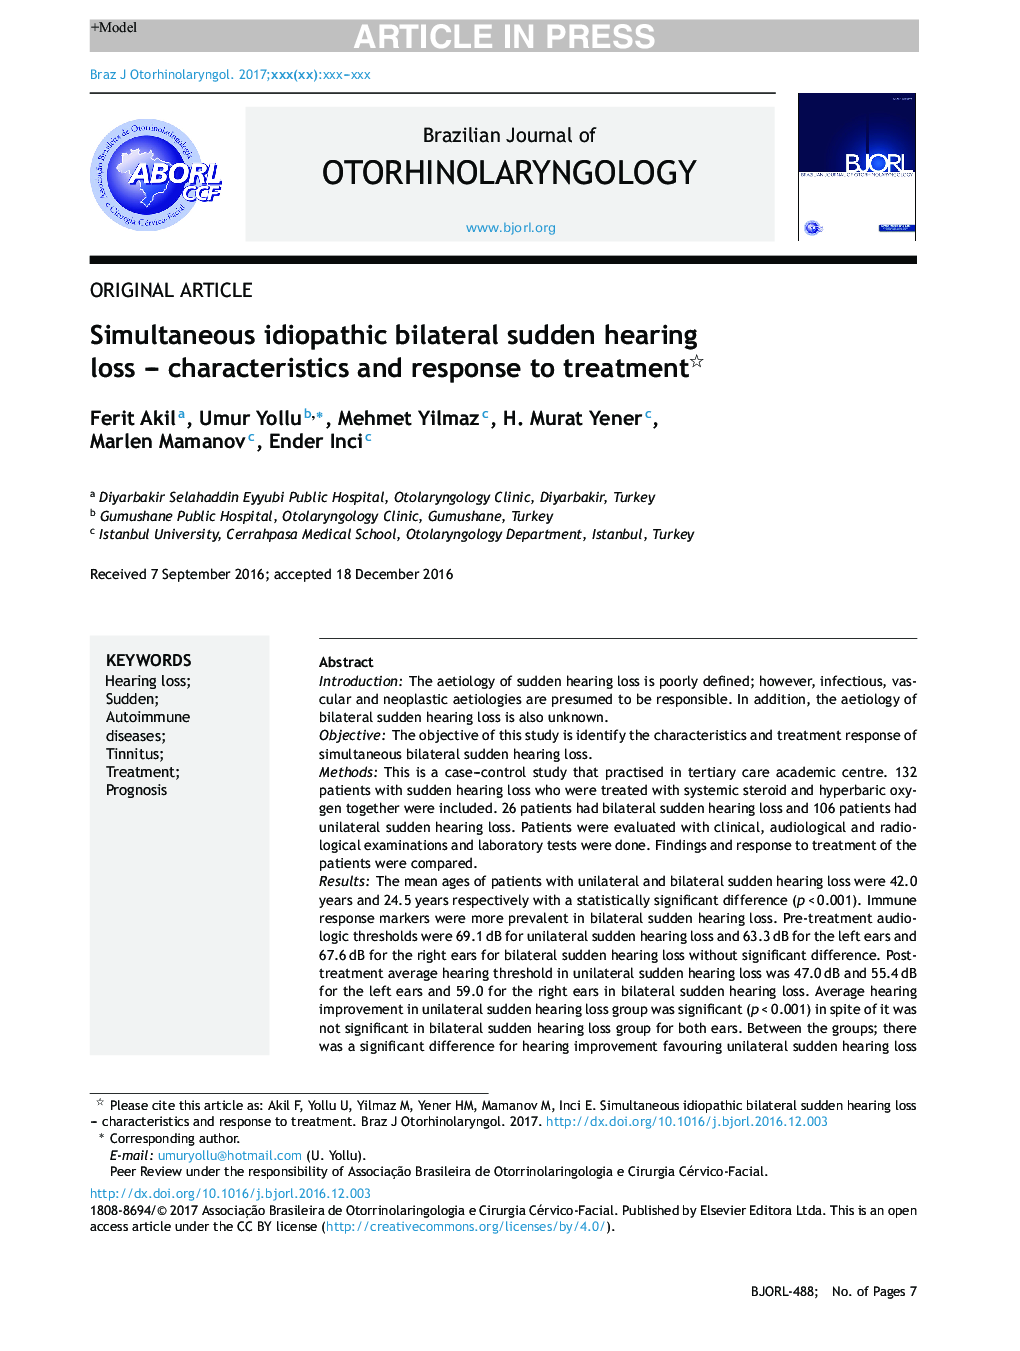 Simultaneous idiopathic bilateral sudden hearing loss - characteristics and response to treatment